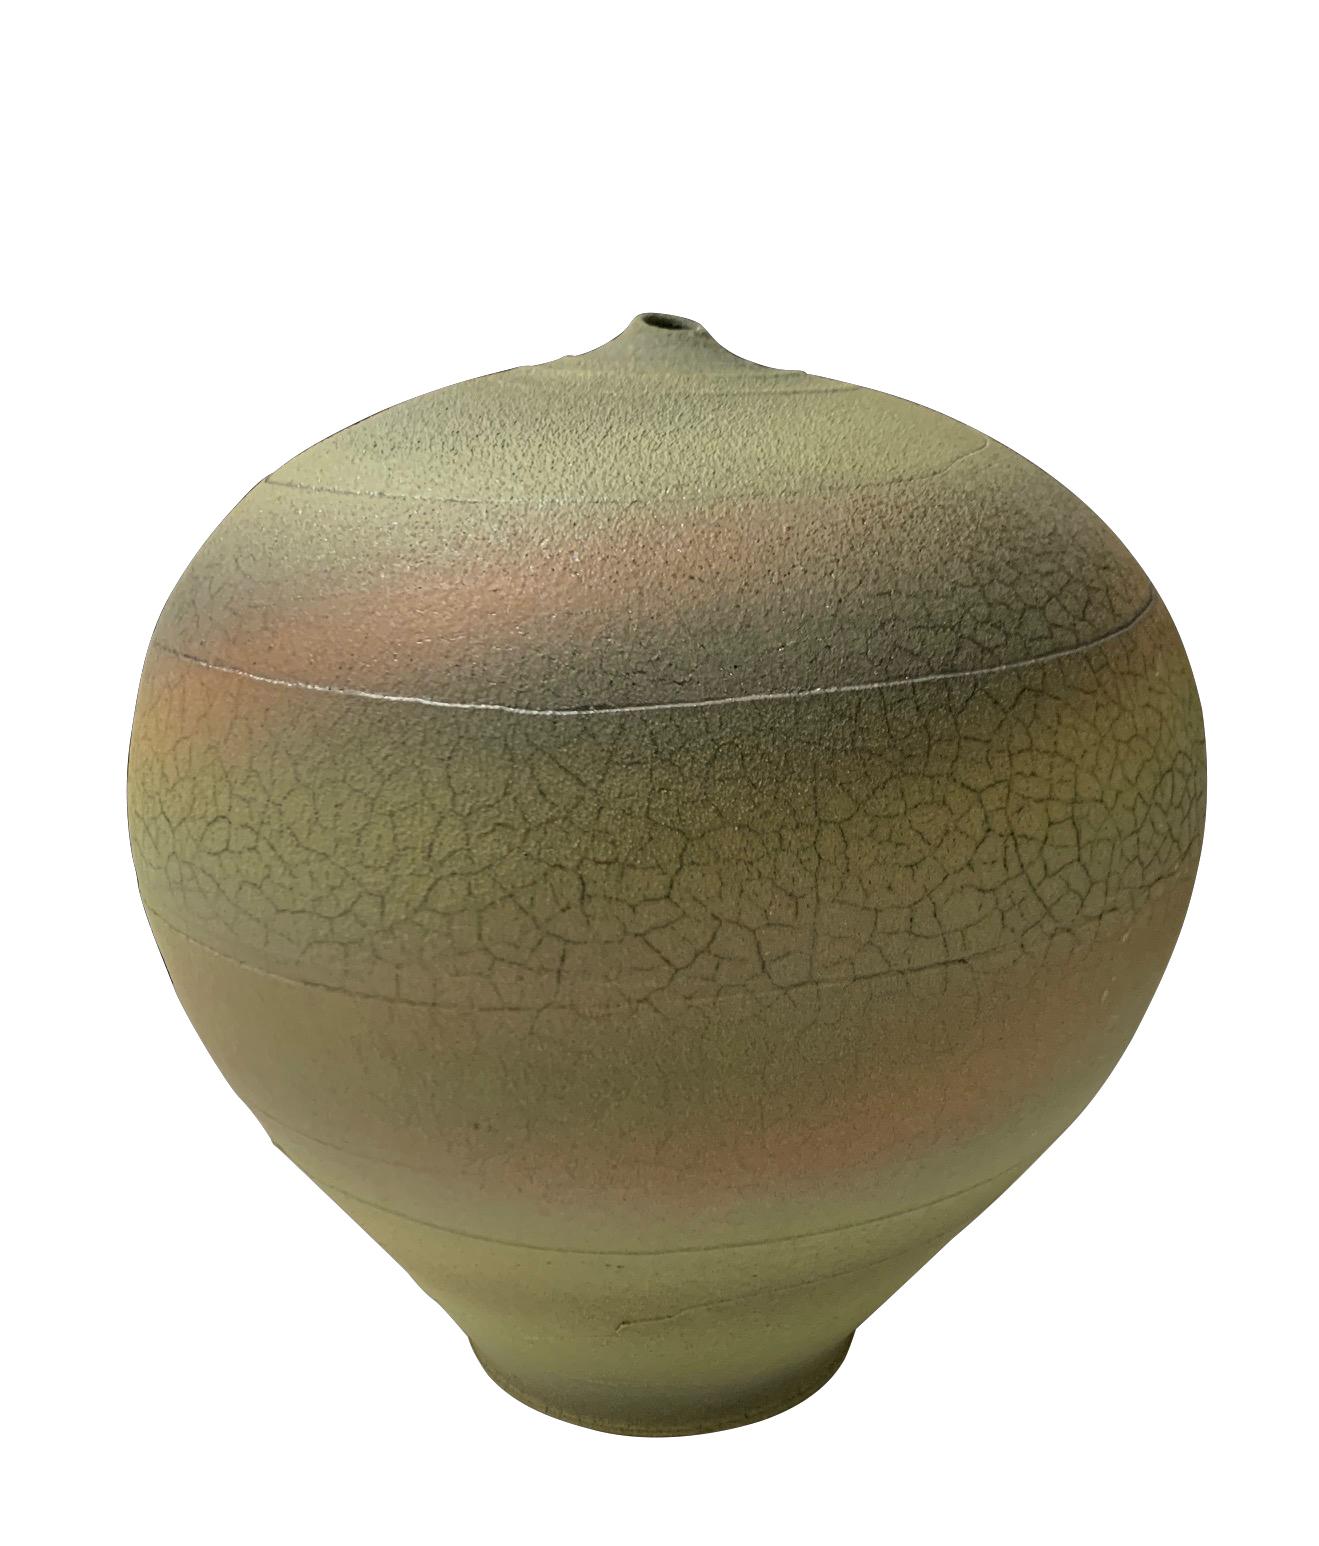 Contemporary textured ceramic earthenware vase.
Green body with bands of pale orange, yellow and blue.
The glaze has a crackle effect giving it an ancient feel.
Tiny top spout.
Hand made one of a kind.
Part of a collection of earthenware vases.